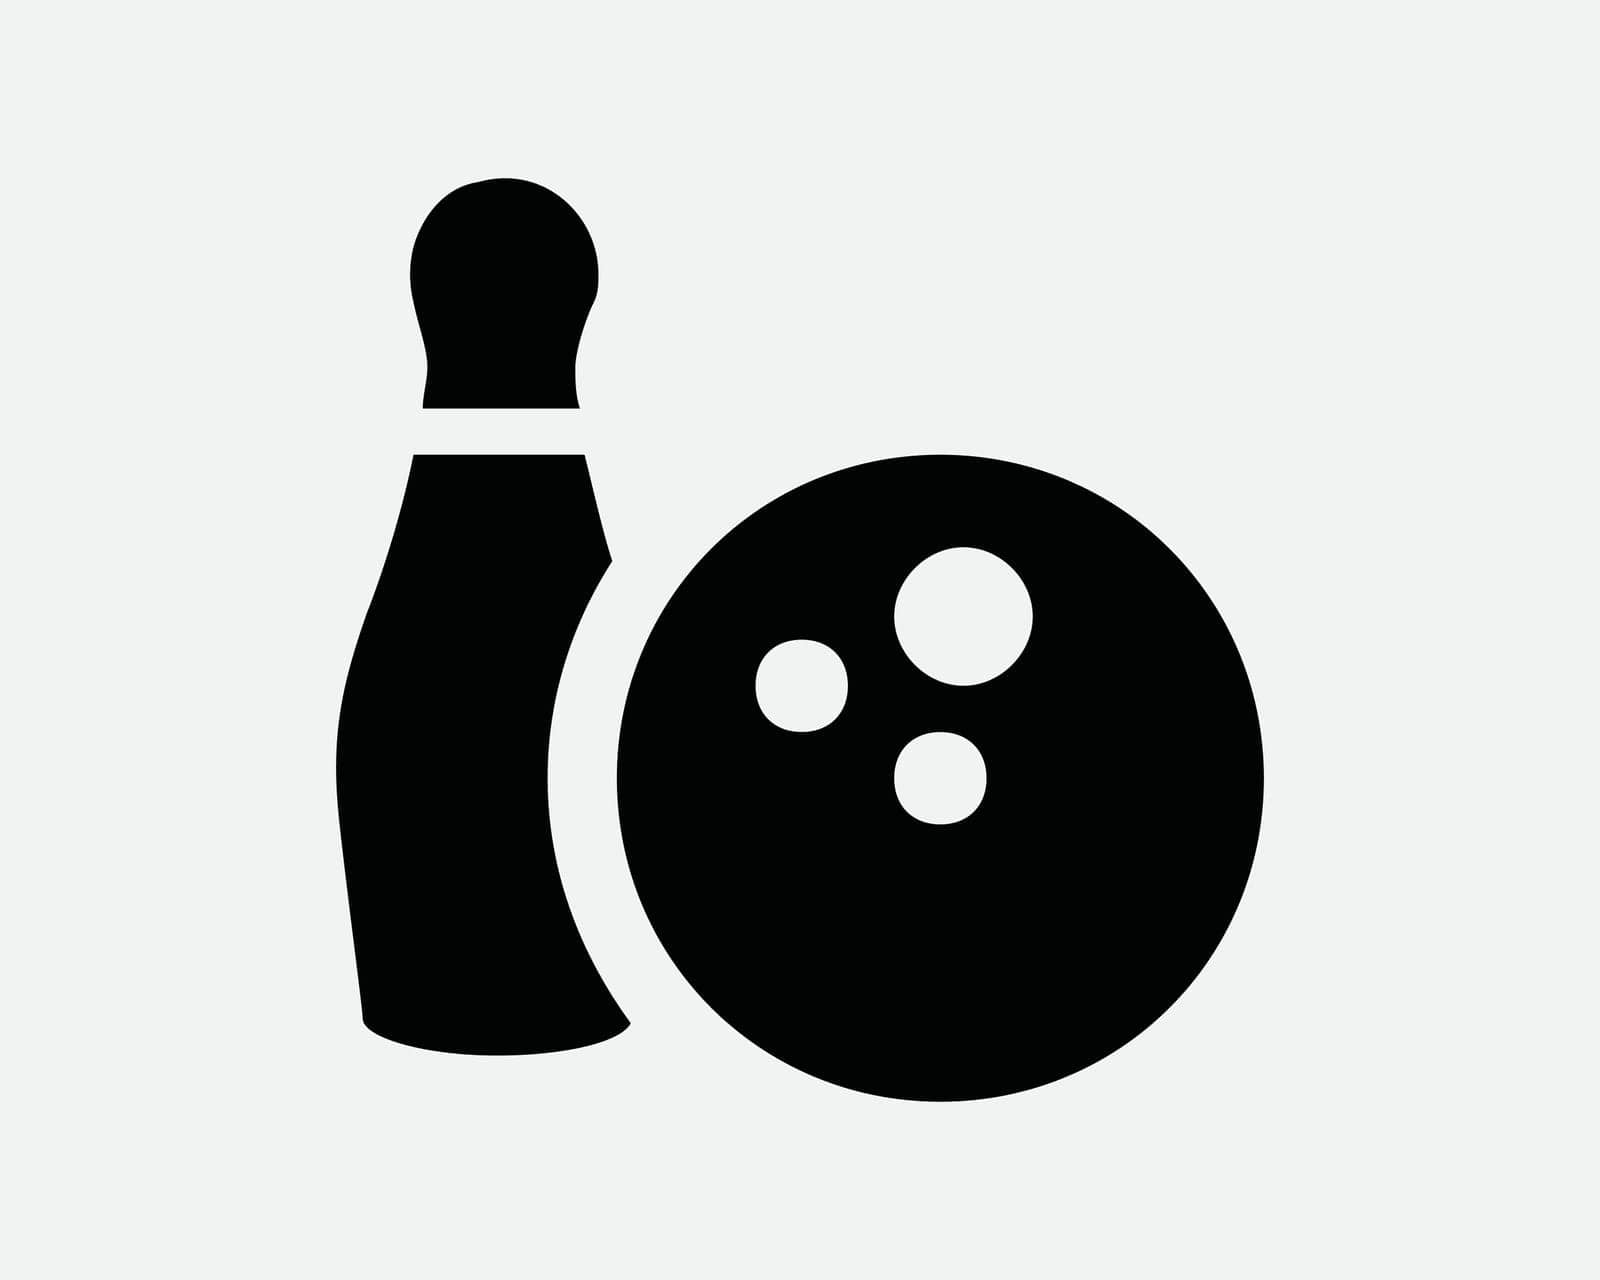 Bowling Ball and Pin Icon by xileodesigns